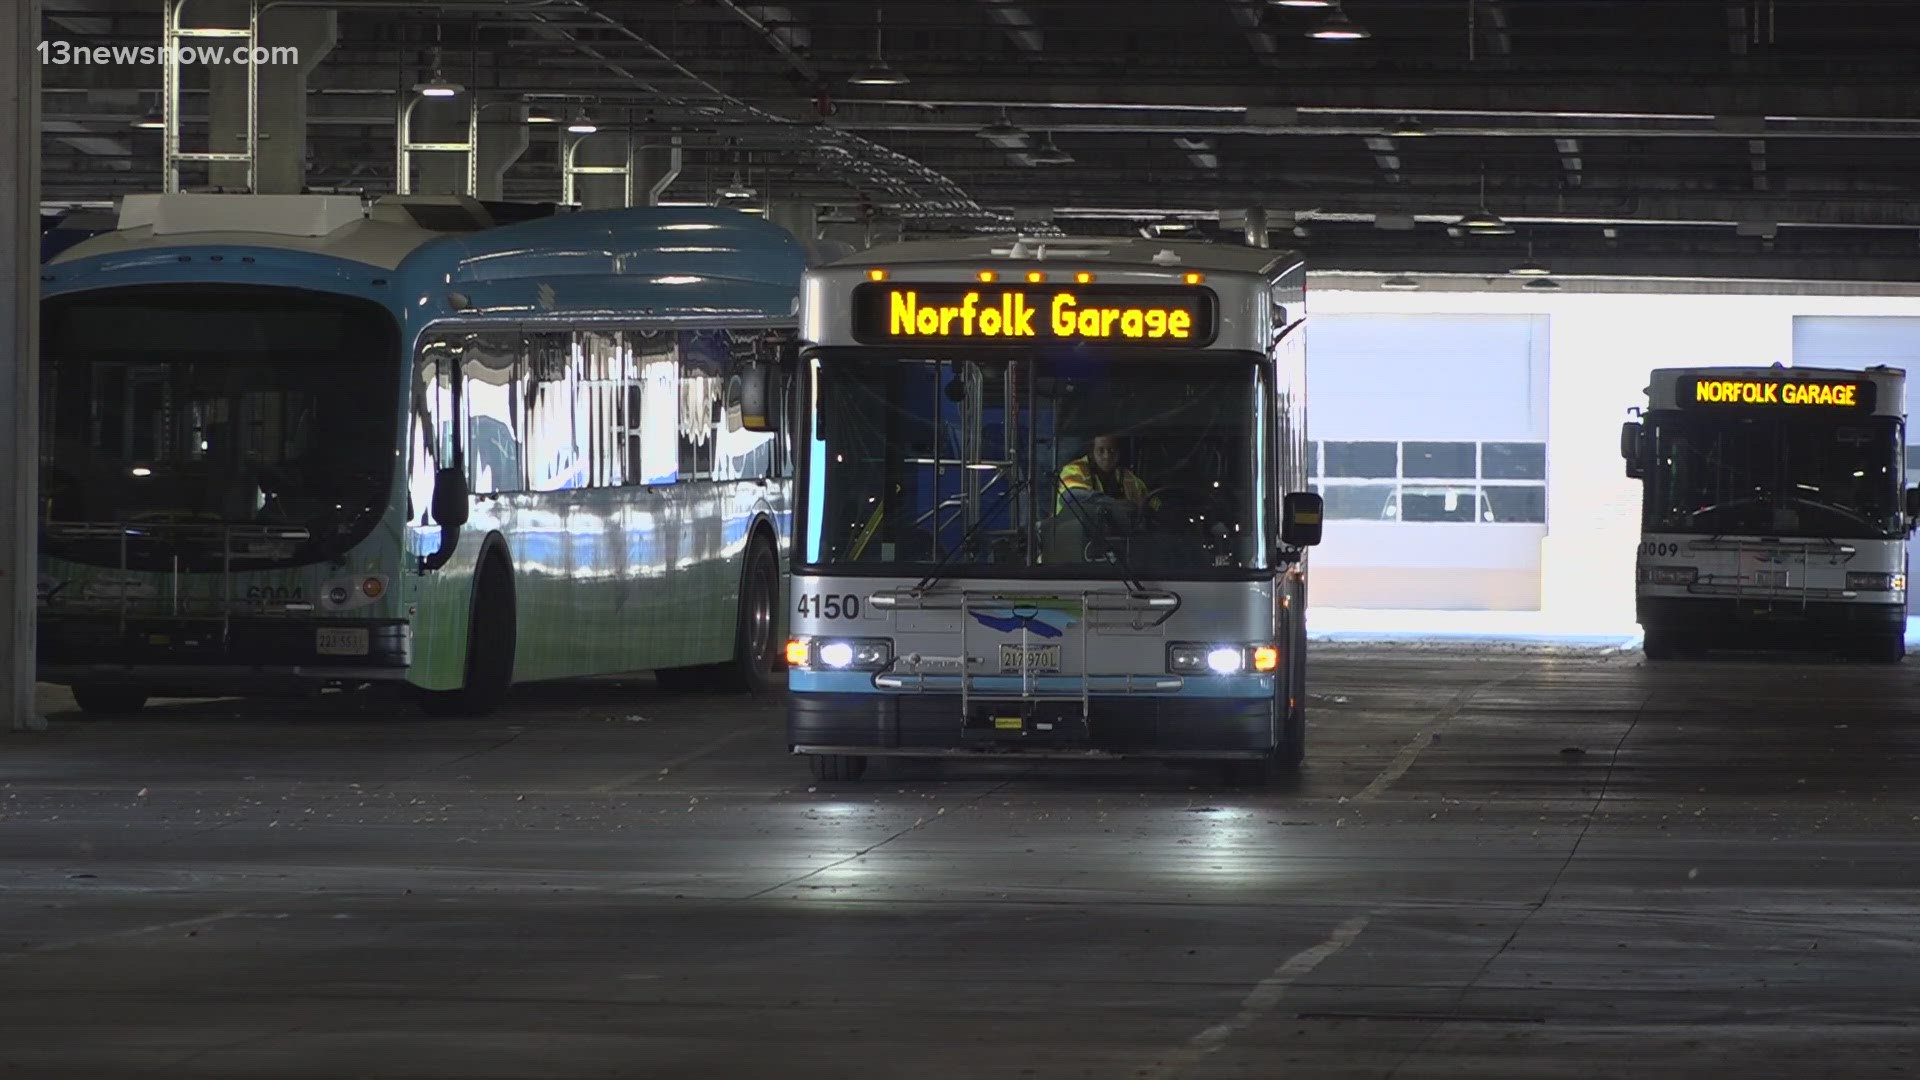 Getting more people where they need to go faster is the goal of expanded bus services from Norfolk to the Virginia Beach Oceanfront.